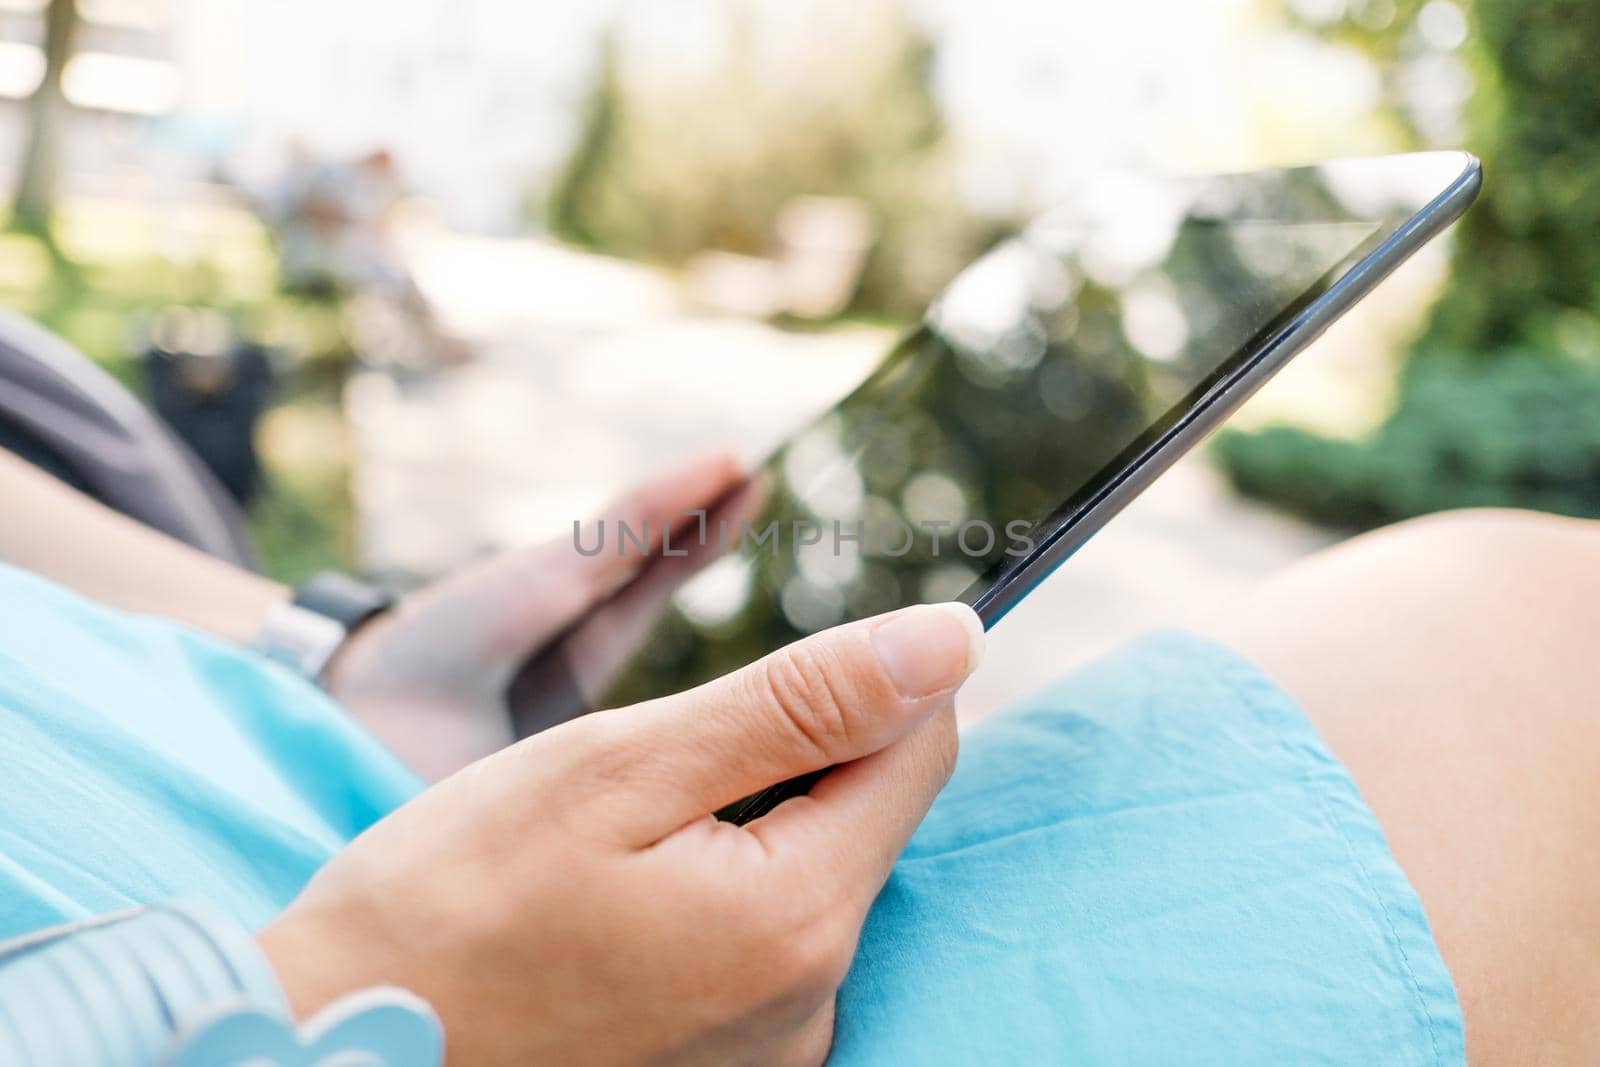 Unrecognizable young woman using digital tablet in the park, close-up of hands.